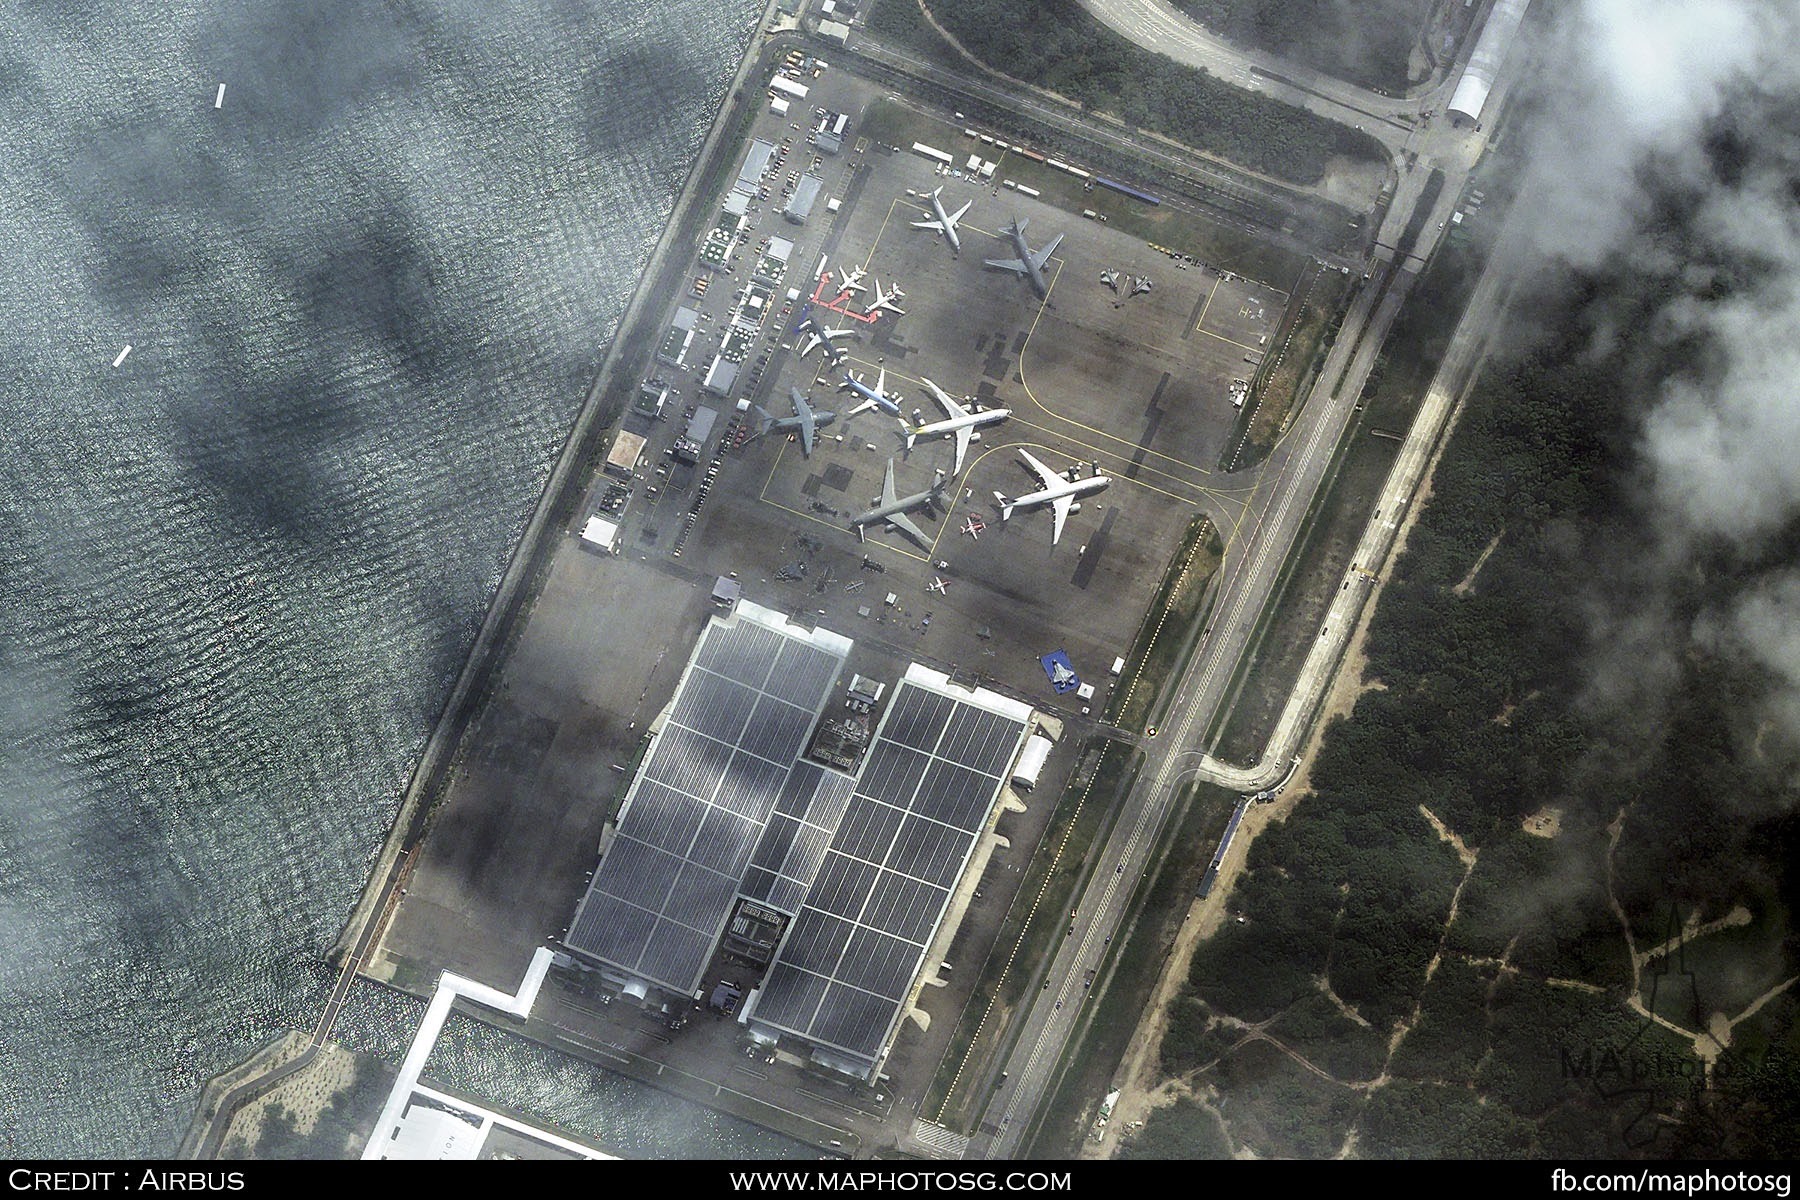 Airbus features for the first time high resolution Pléiades Neo satellite image of Singapore Airshow site